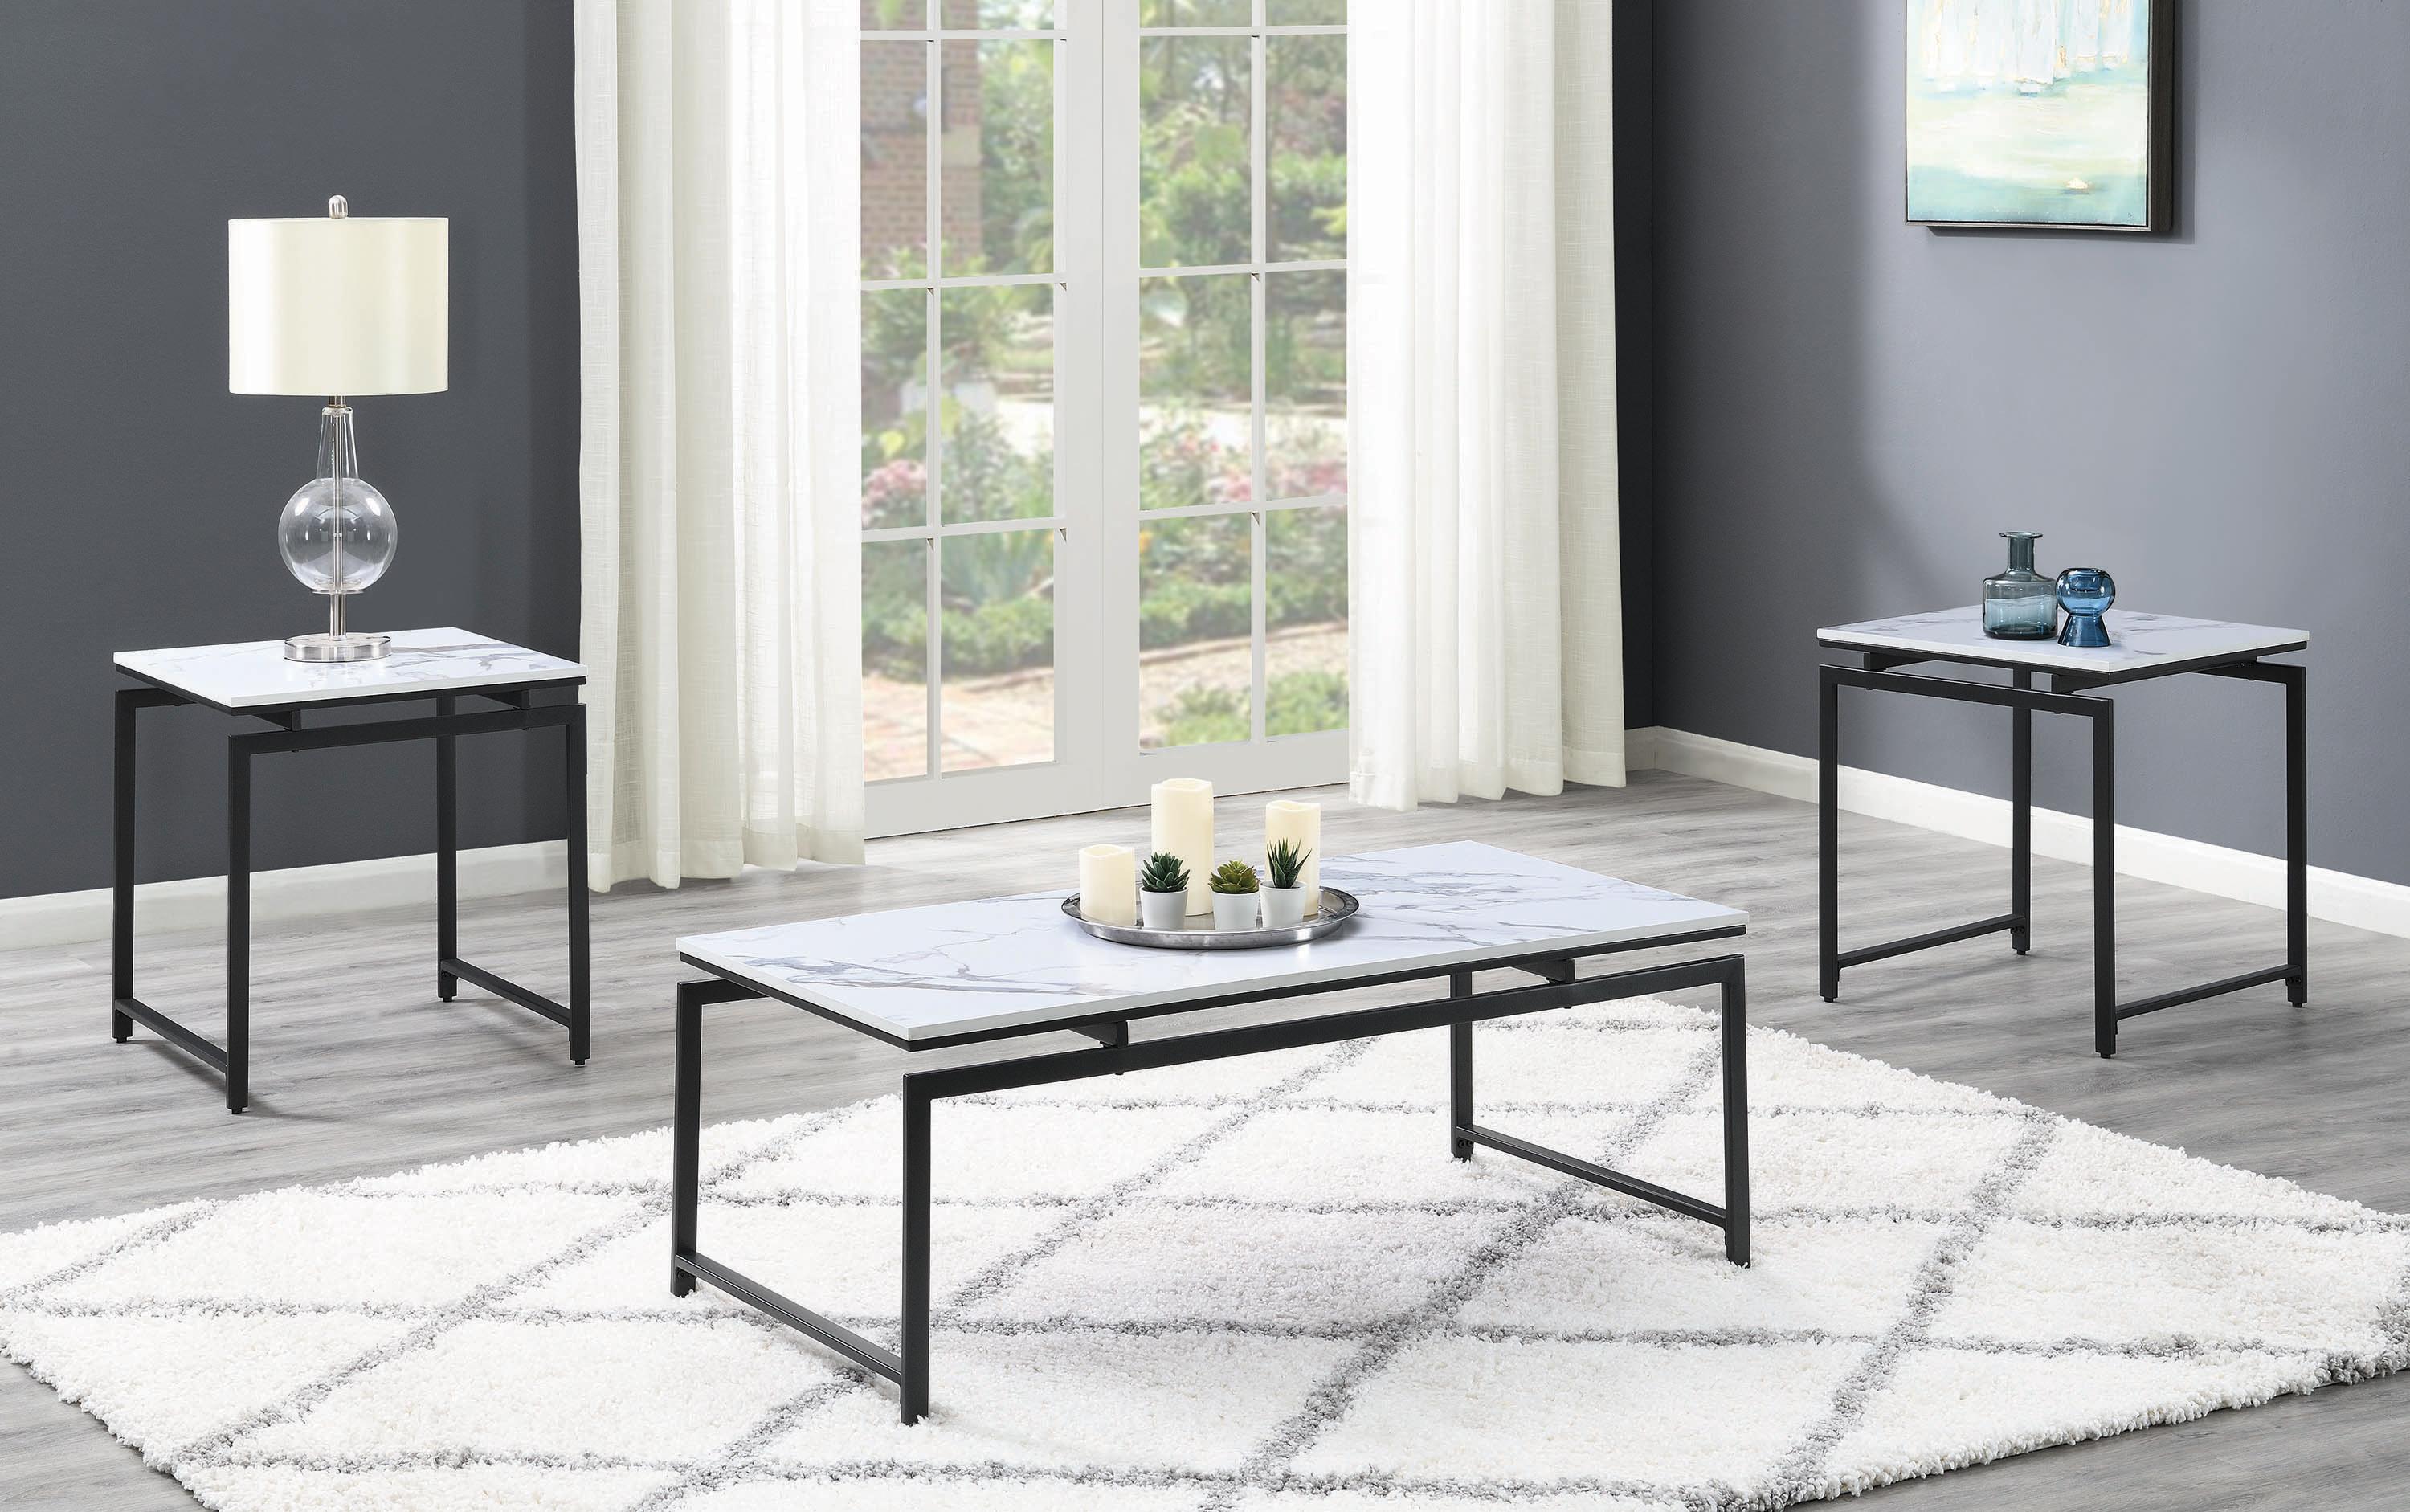 Modern Coffee Table Set 708153 708153 in White 